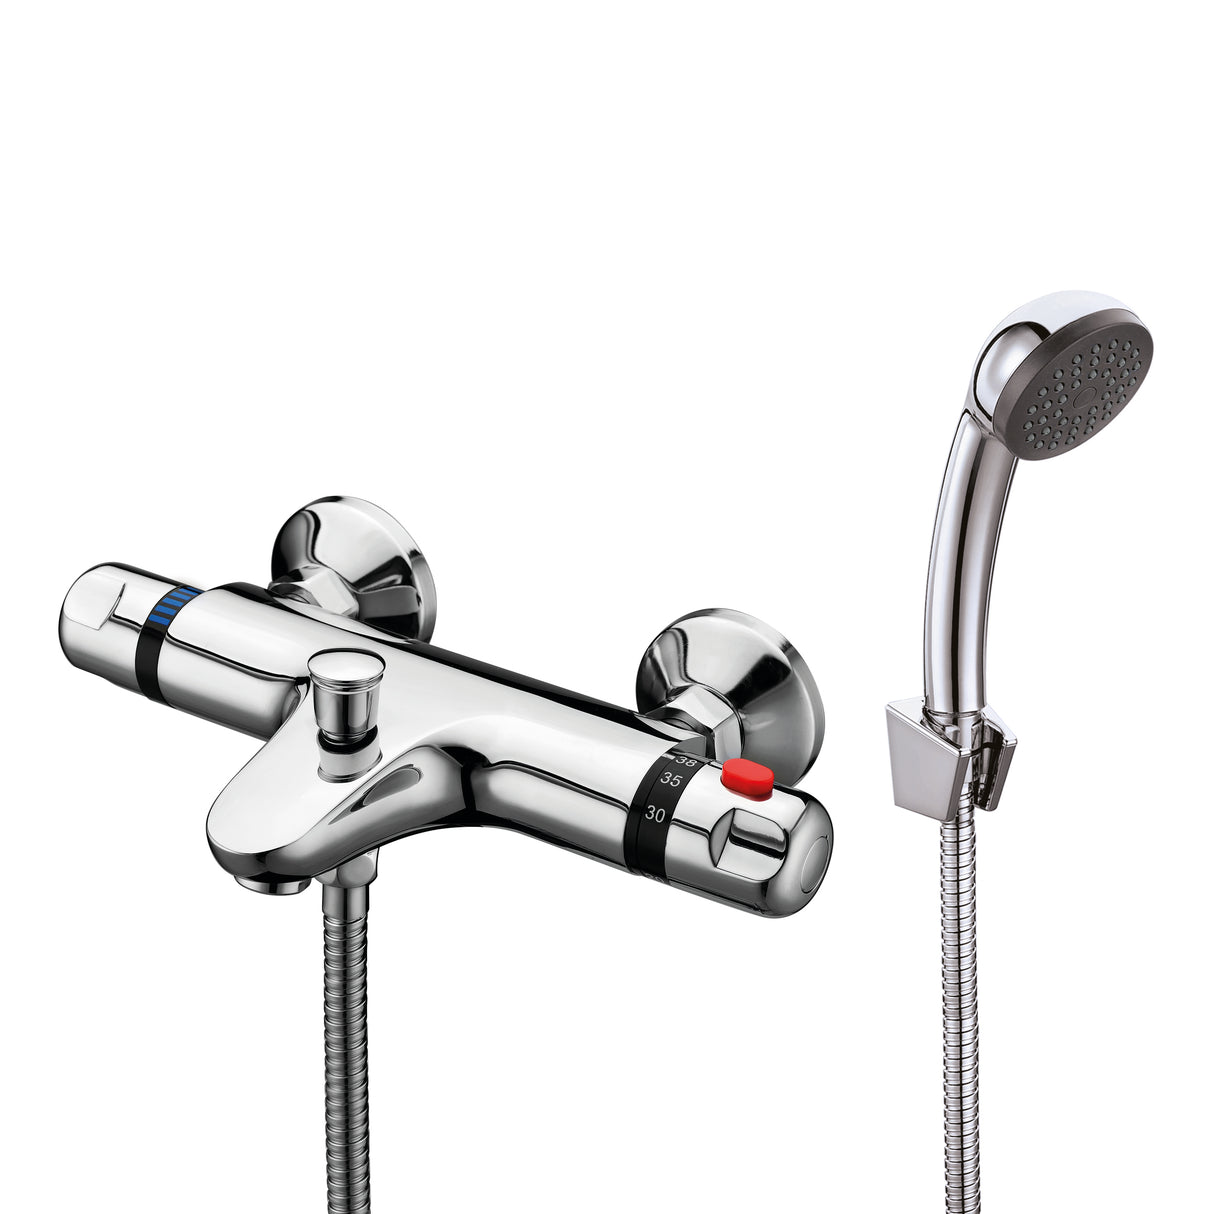 Contract Thermostatic Bath Shower Tap / Valve Mixer Wall And Deck Mounted